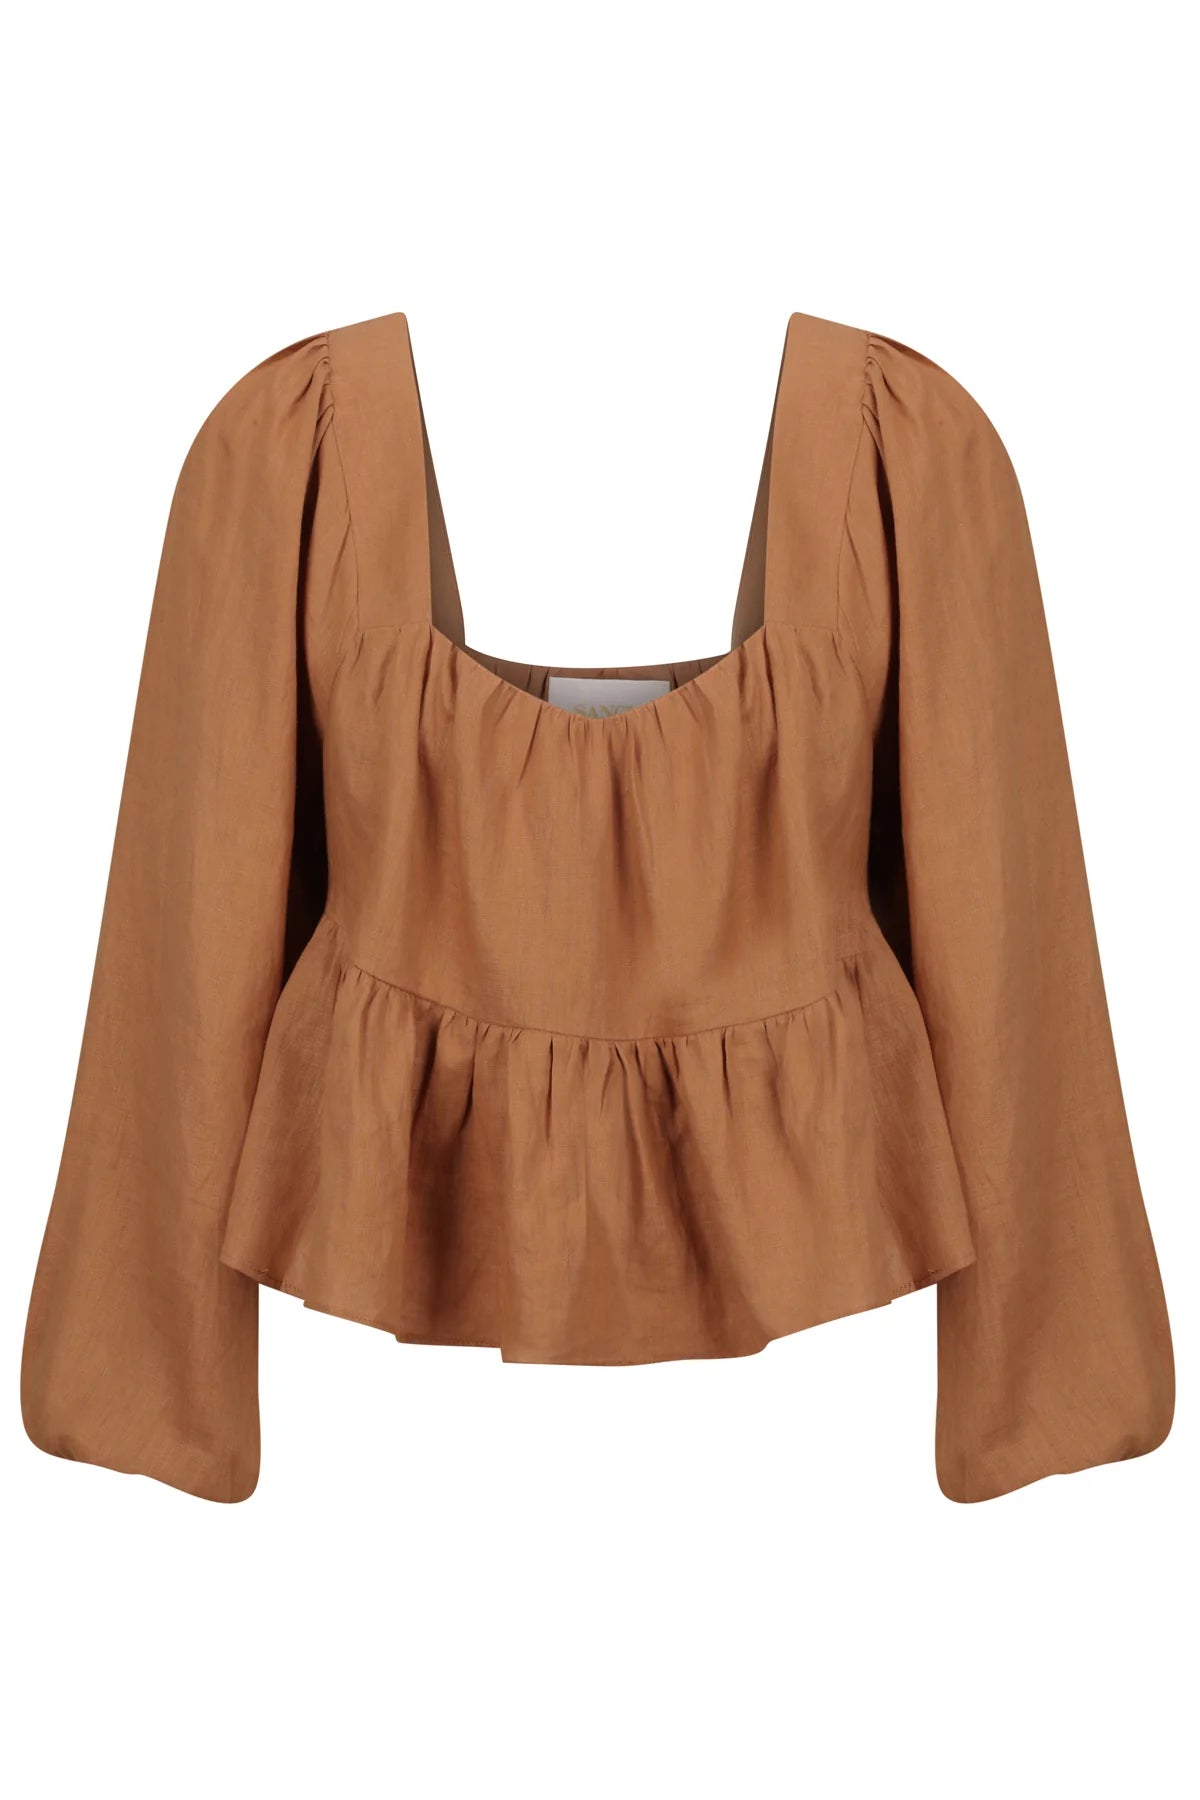 Brown linen top with balloon sleeves